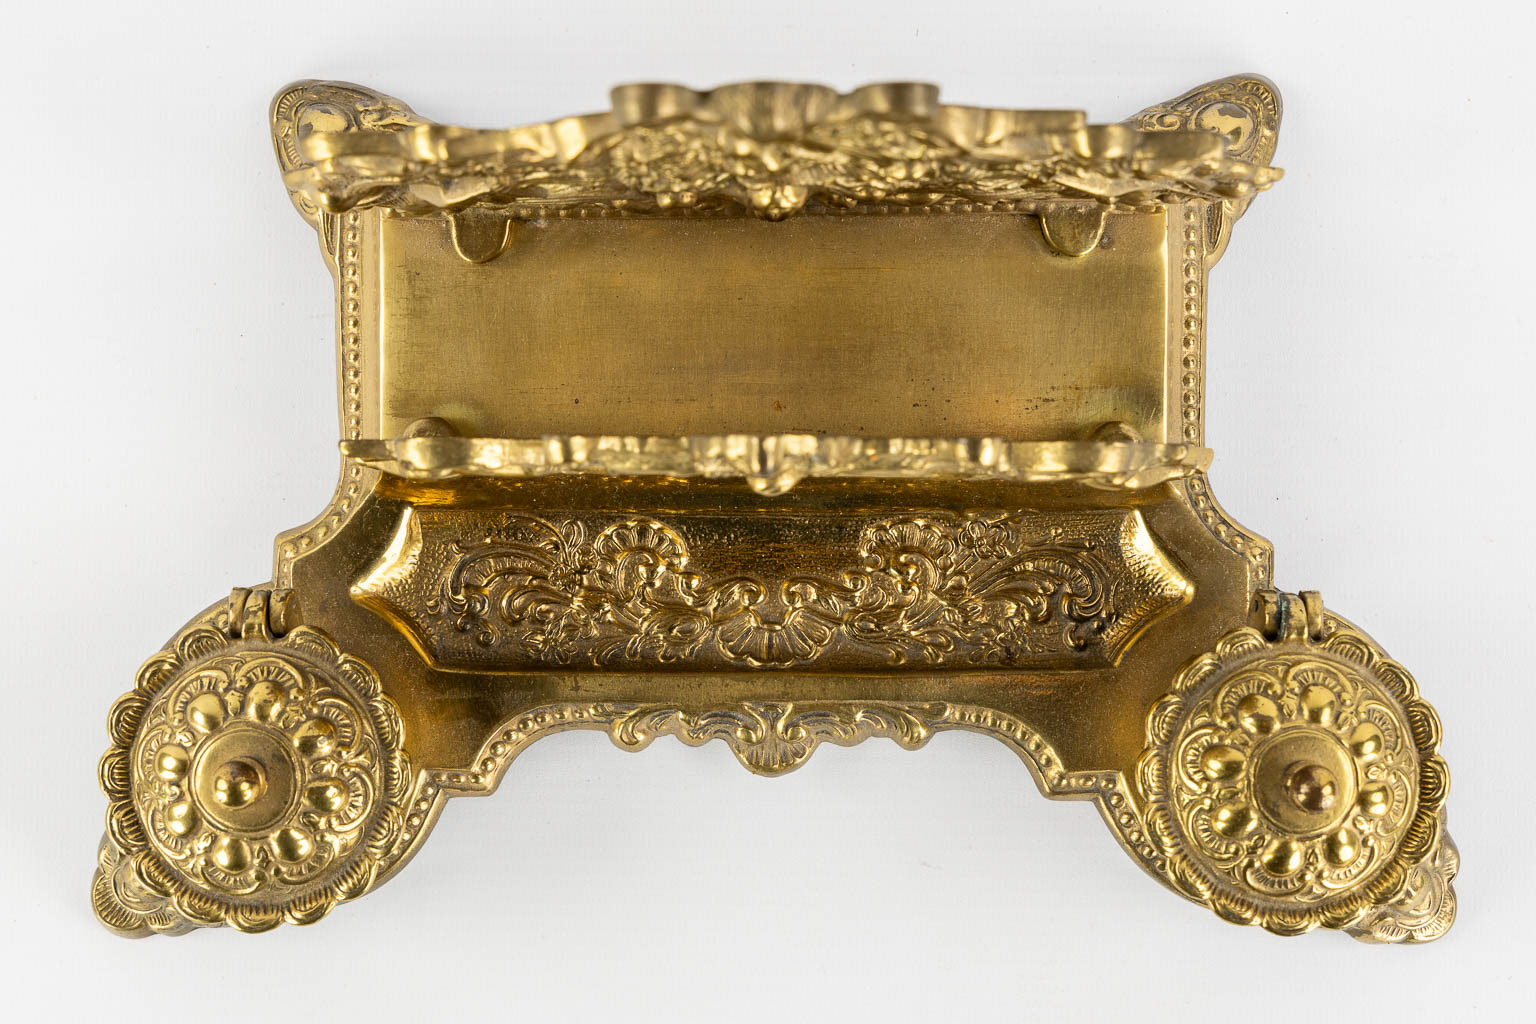 A letter holder and ink pot, polished bronze. (L:20 x W:30 x H:19 cm) - Image 8 of 14